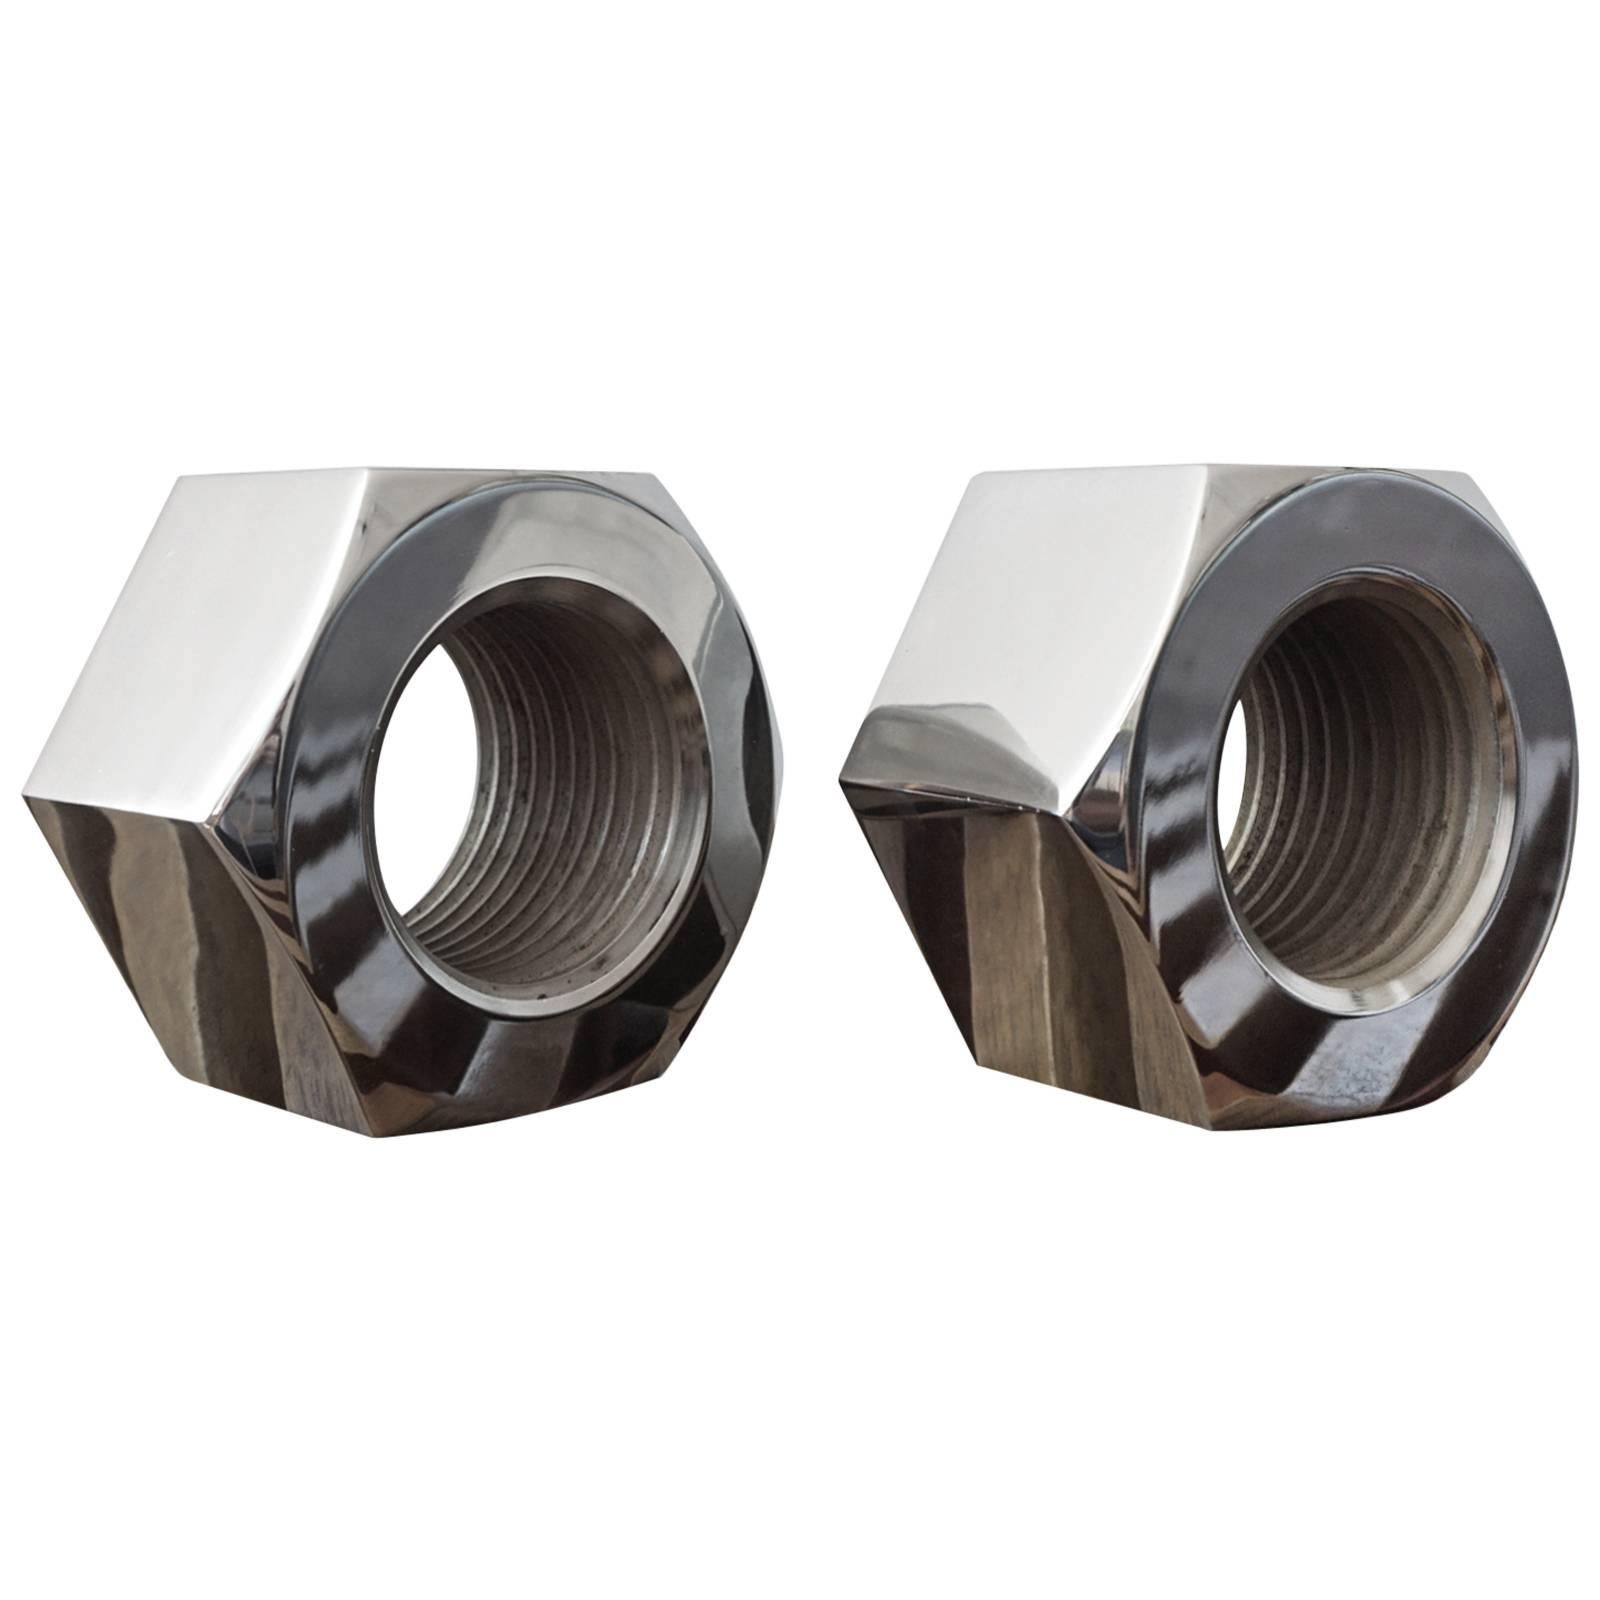 Polished Nickel Nut Bookends by Design Line